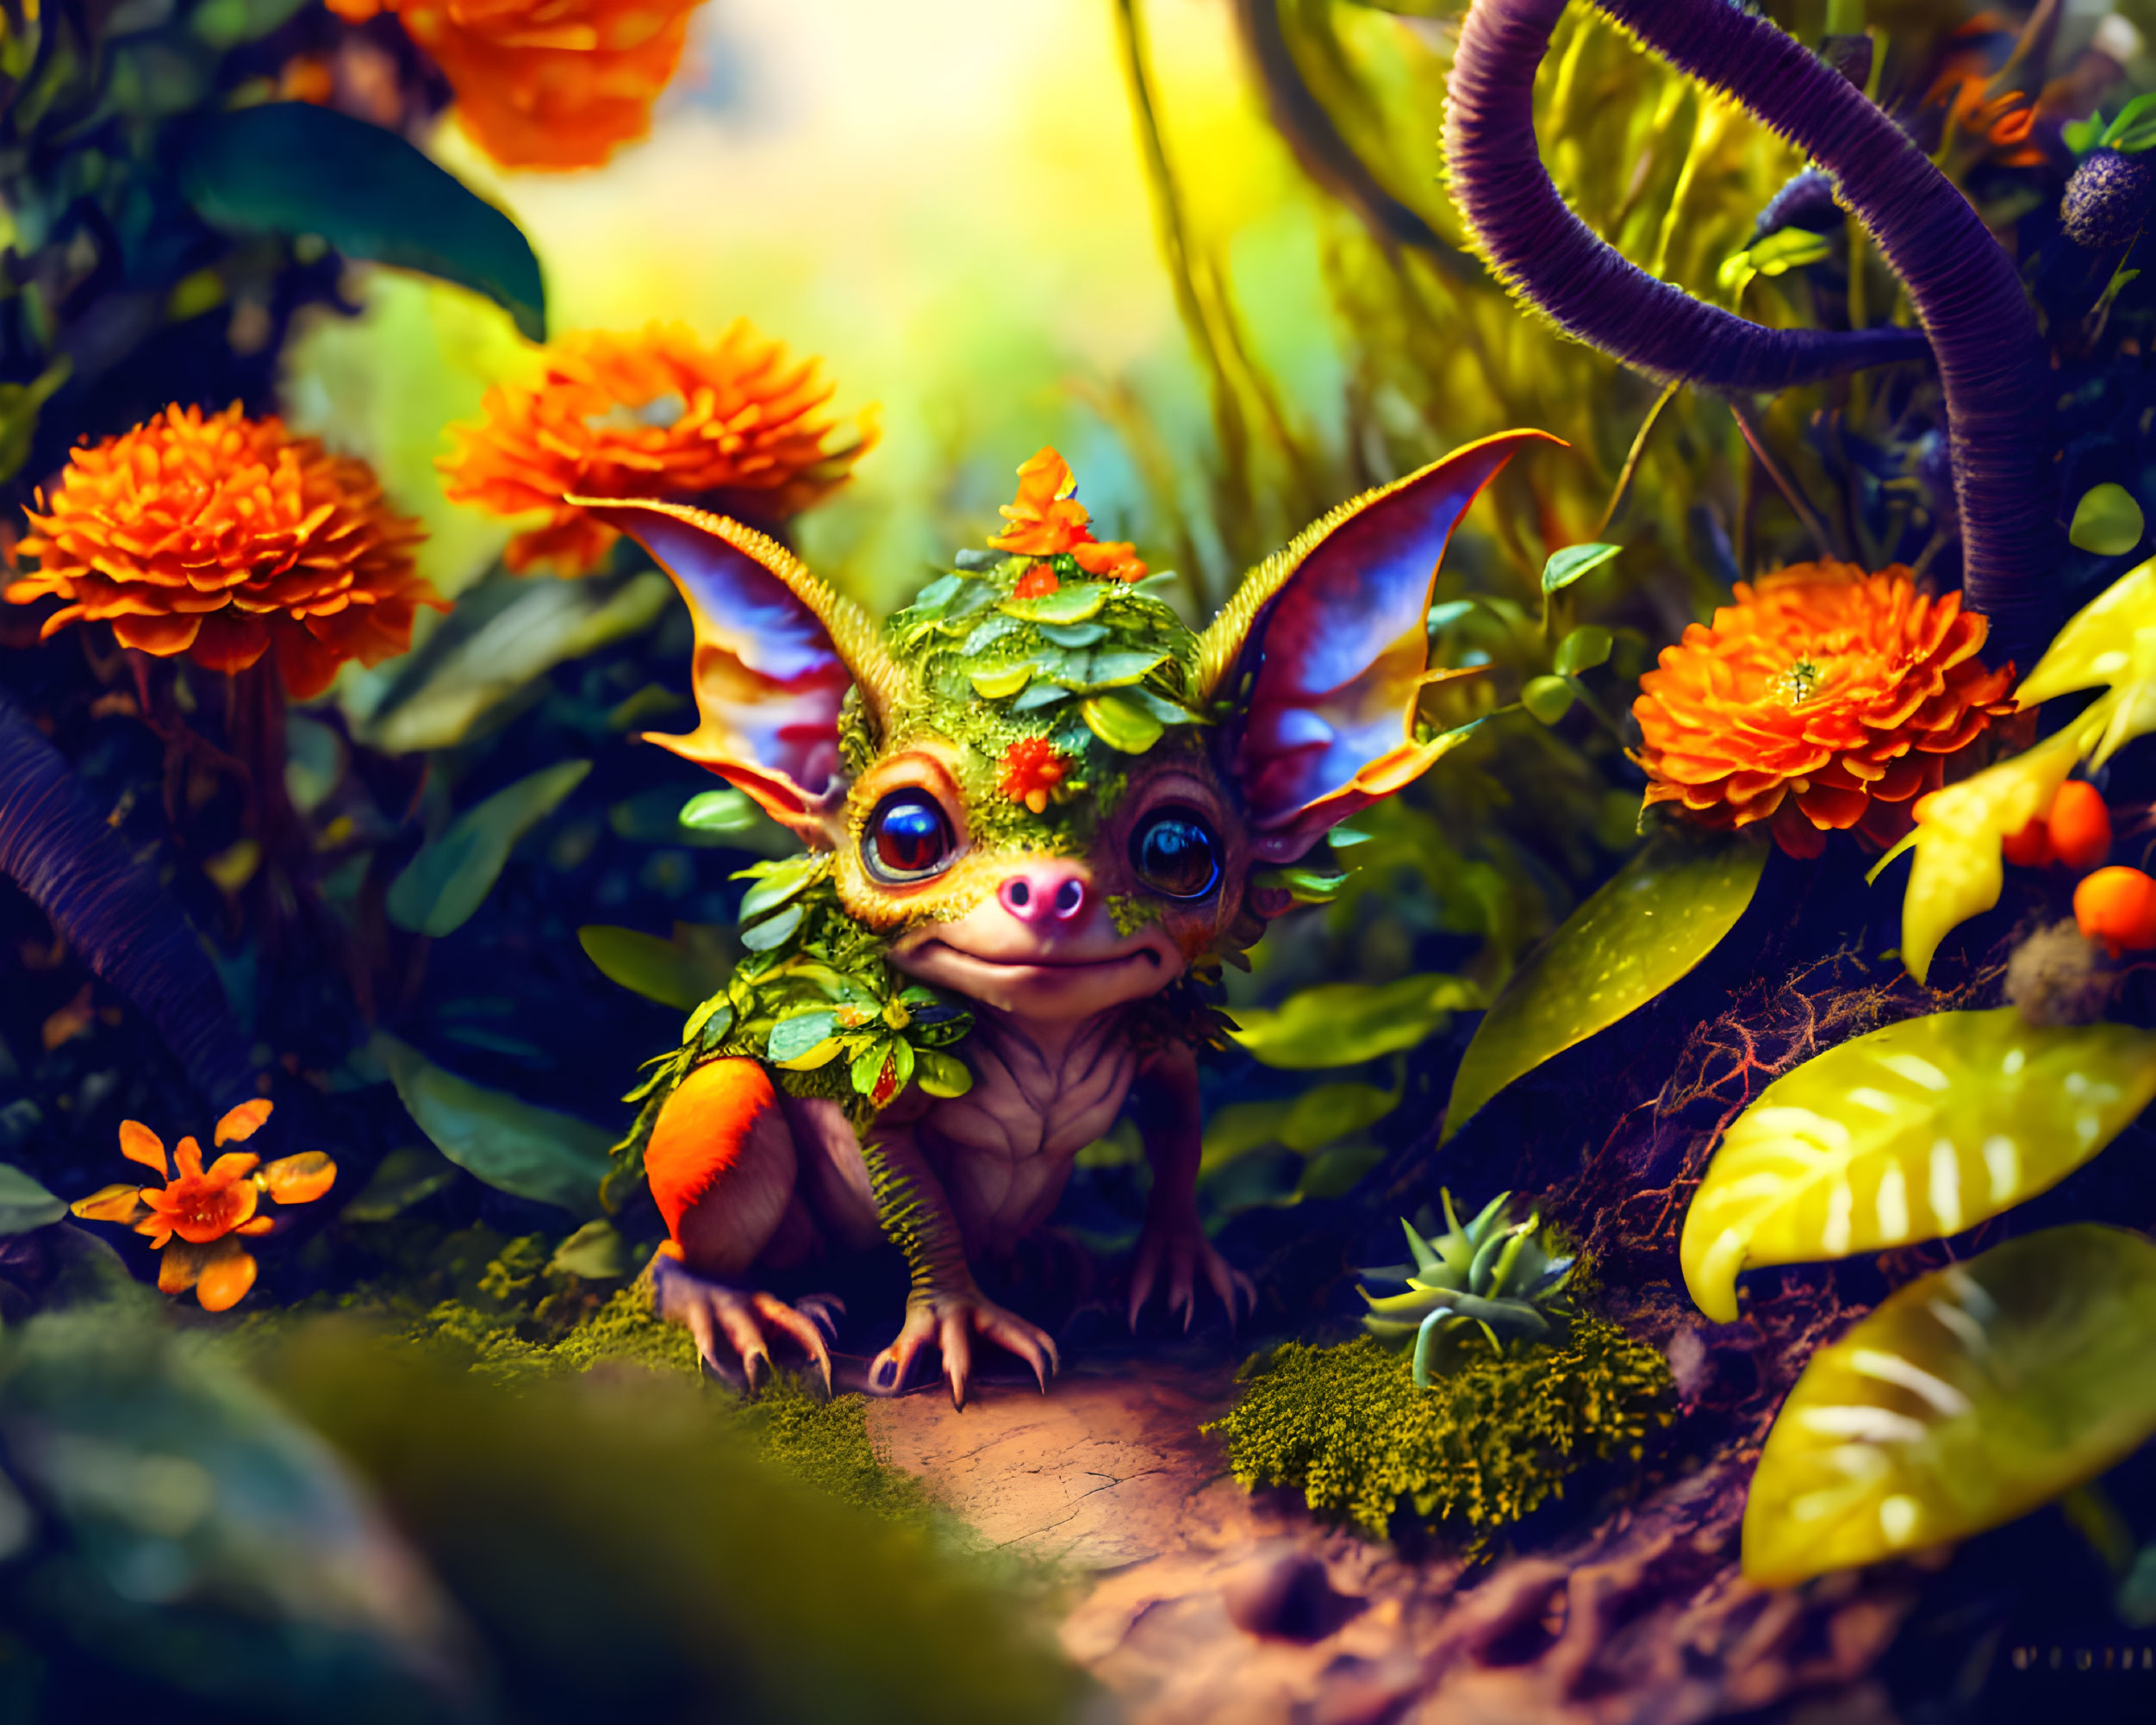 Whimsical creature with large eyes, pointed ears, and dragonfly wings among vibrant flowers